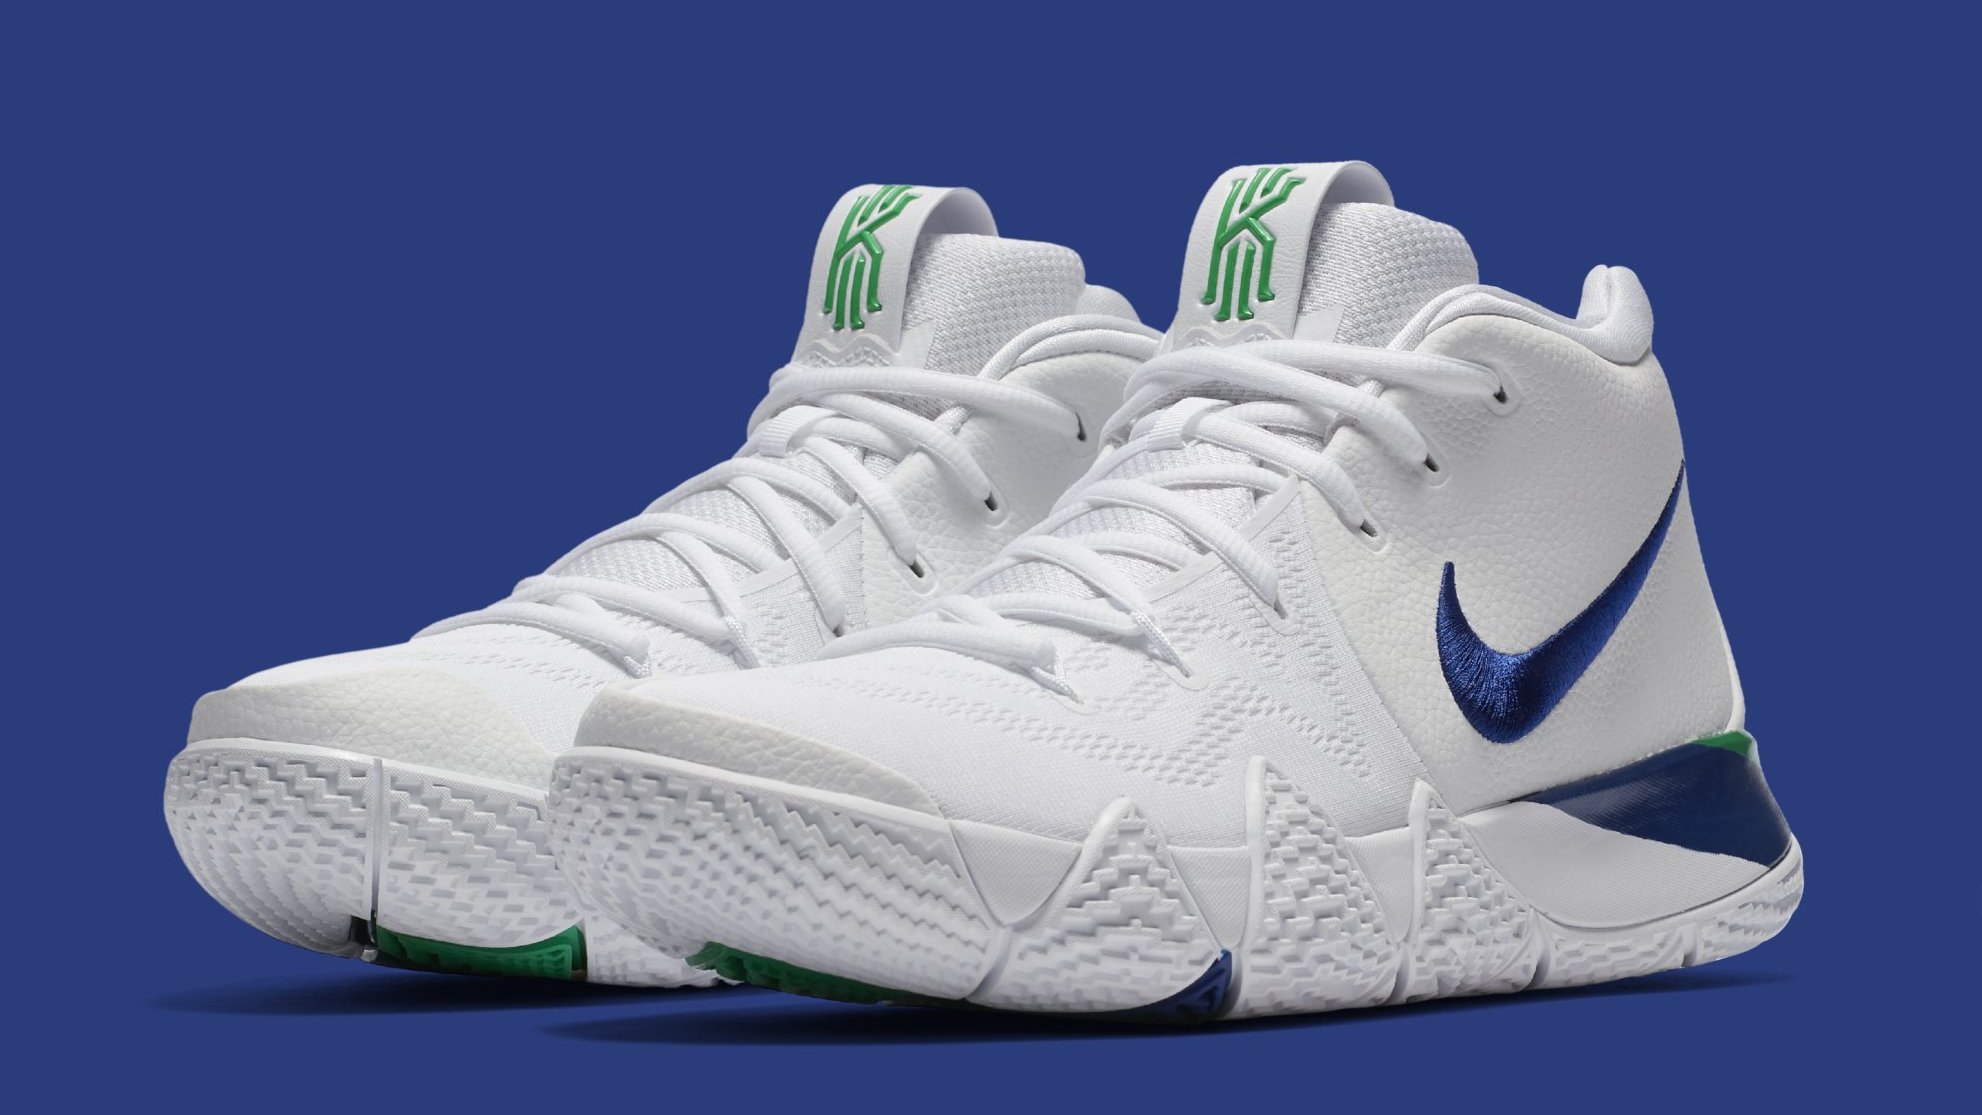 blue and green kyrie 4